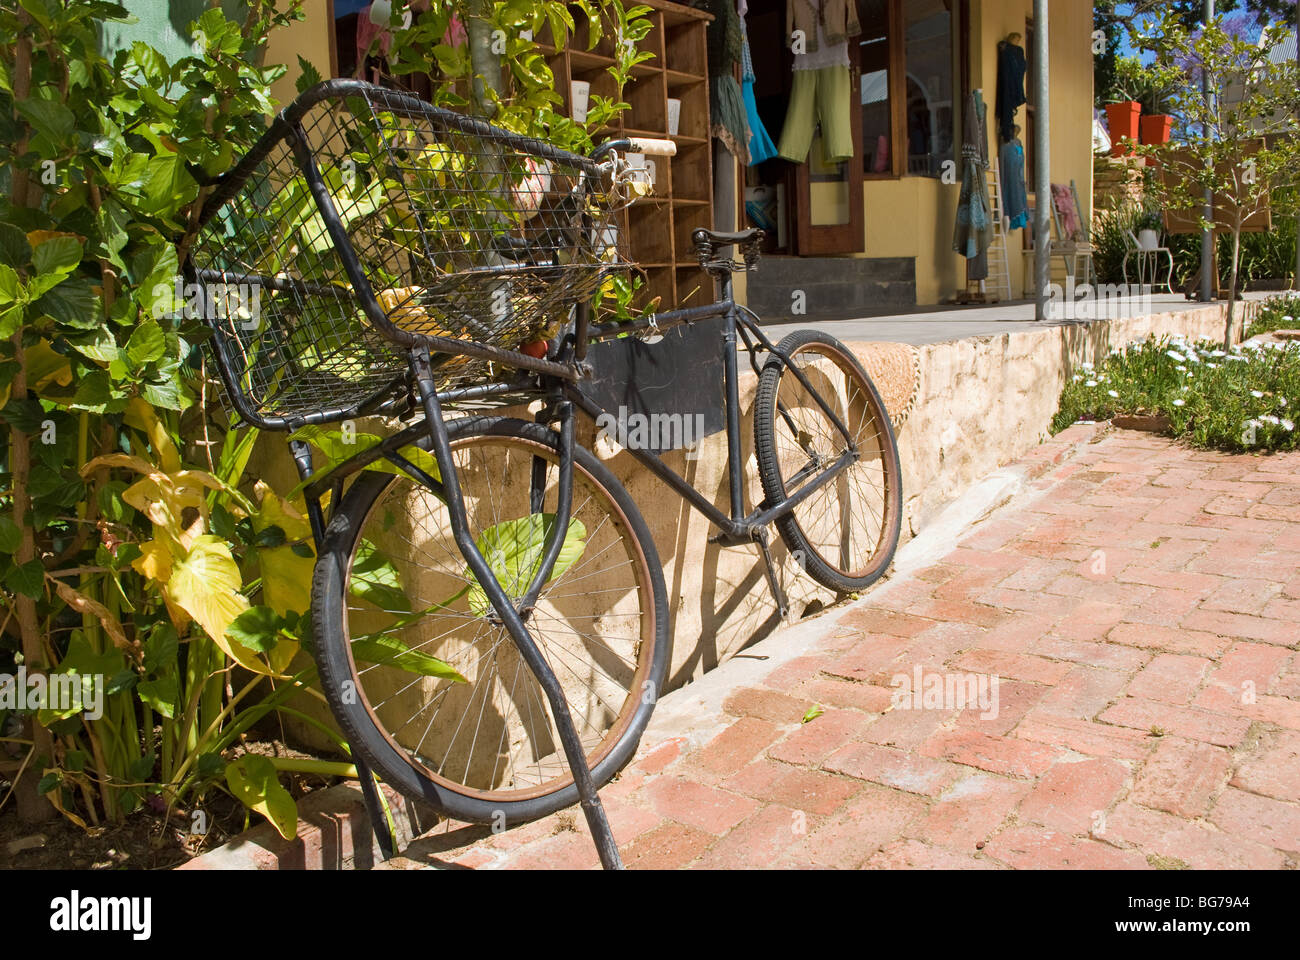 An old delivery bicycle outside a shop in the picturesque village of Riebeek Kasteel in the Western Cape, South Africa. Stock Photo